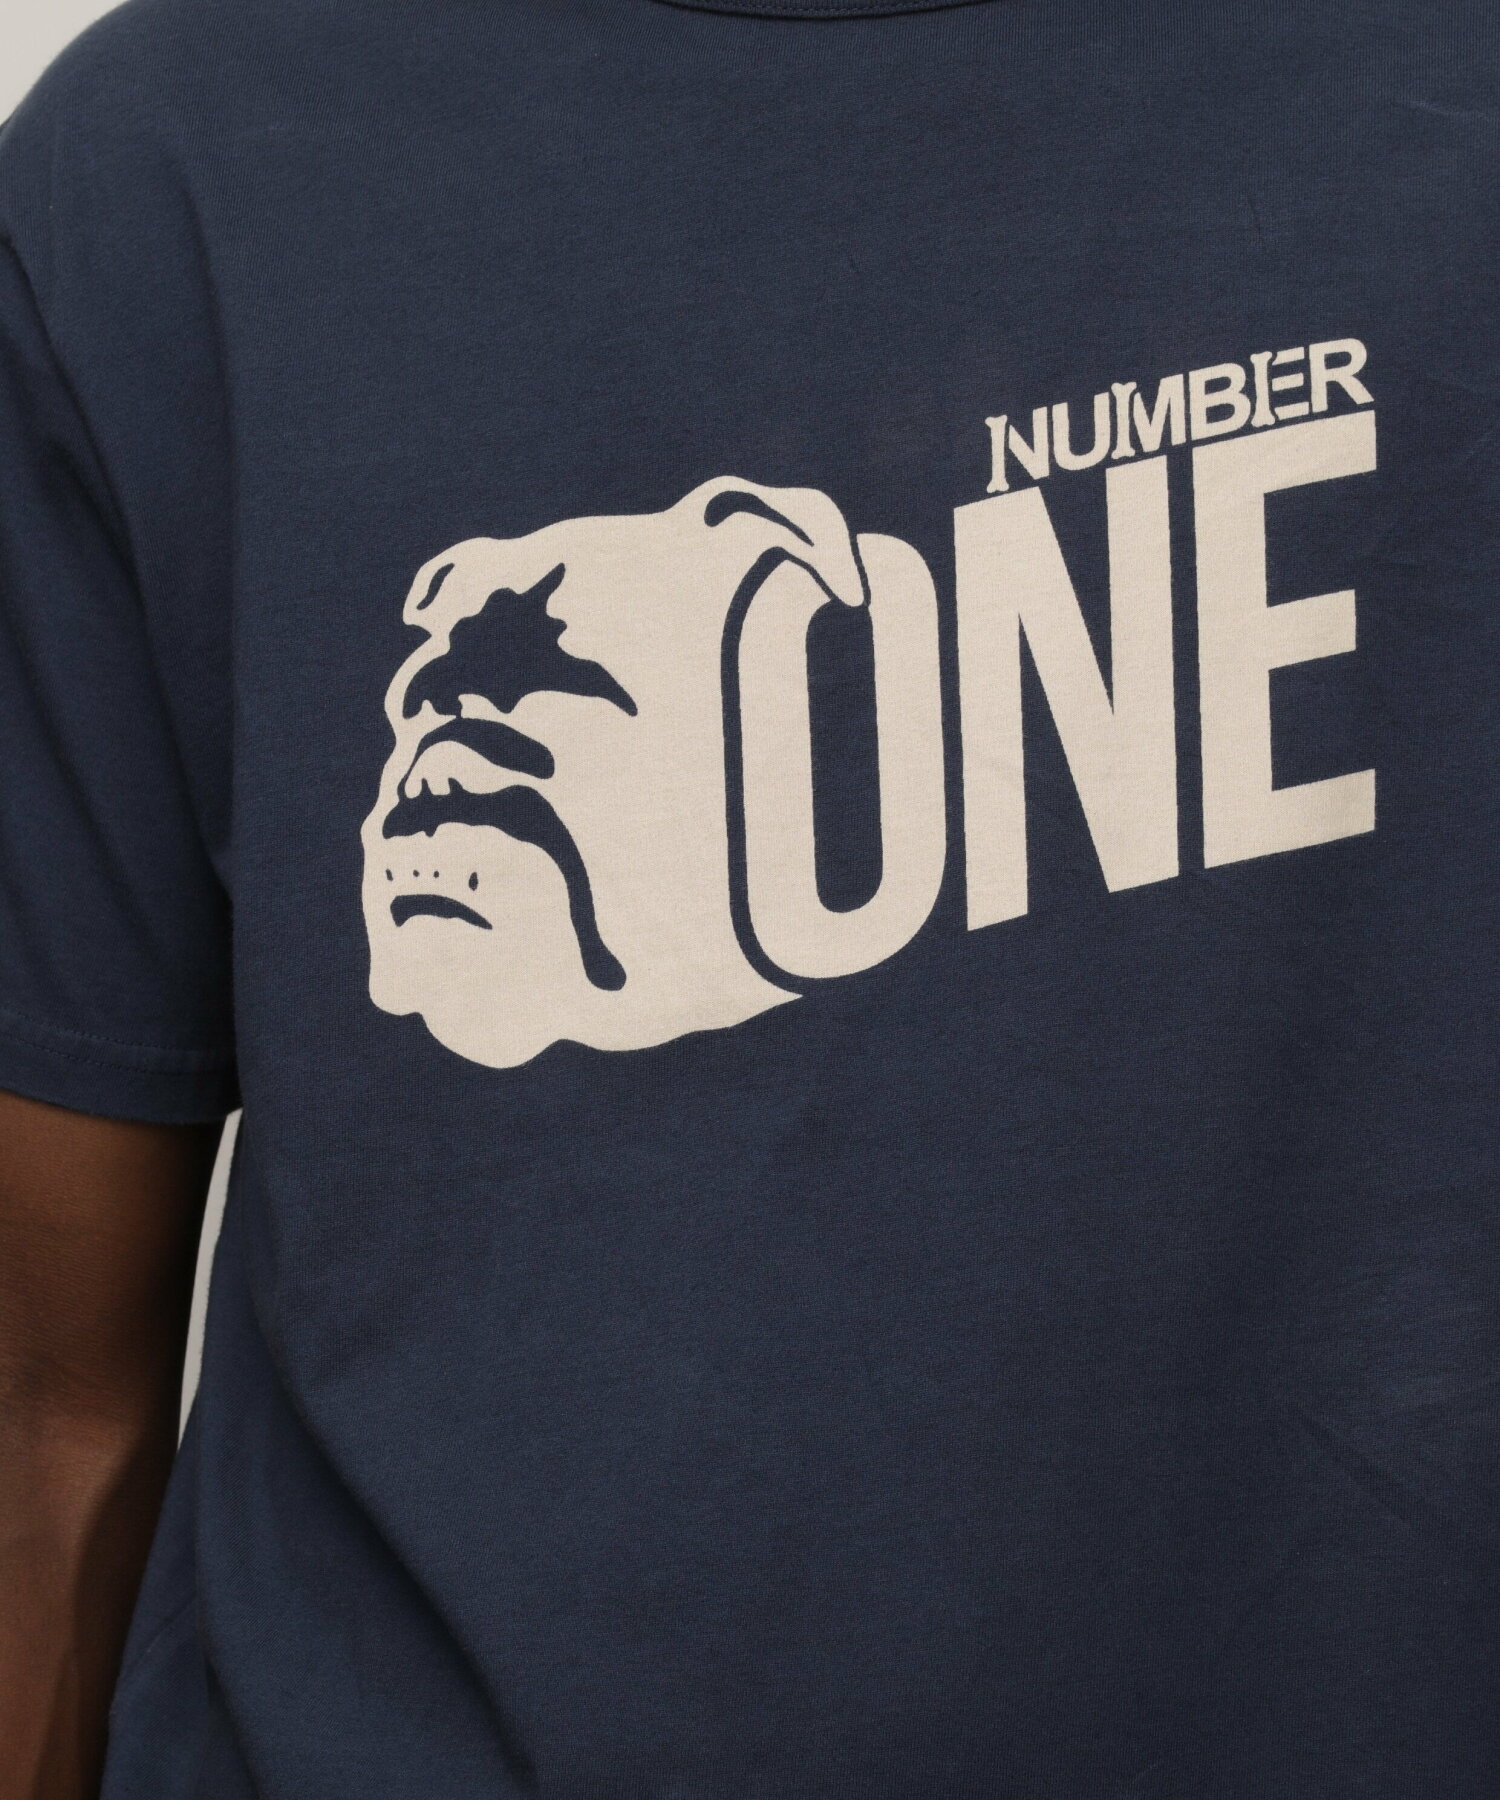 T-SHIRT "NUMBER ONE"/Tシャツ "ナンバーワン